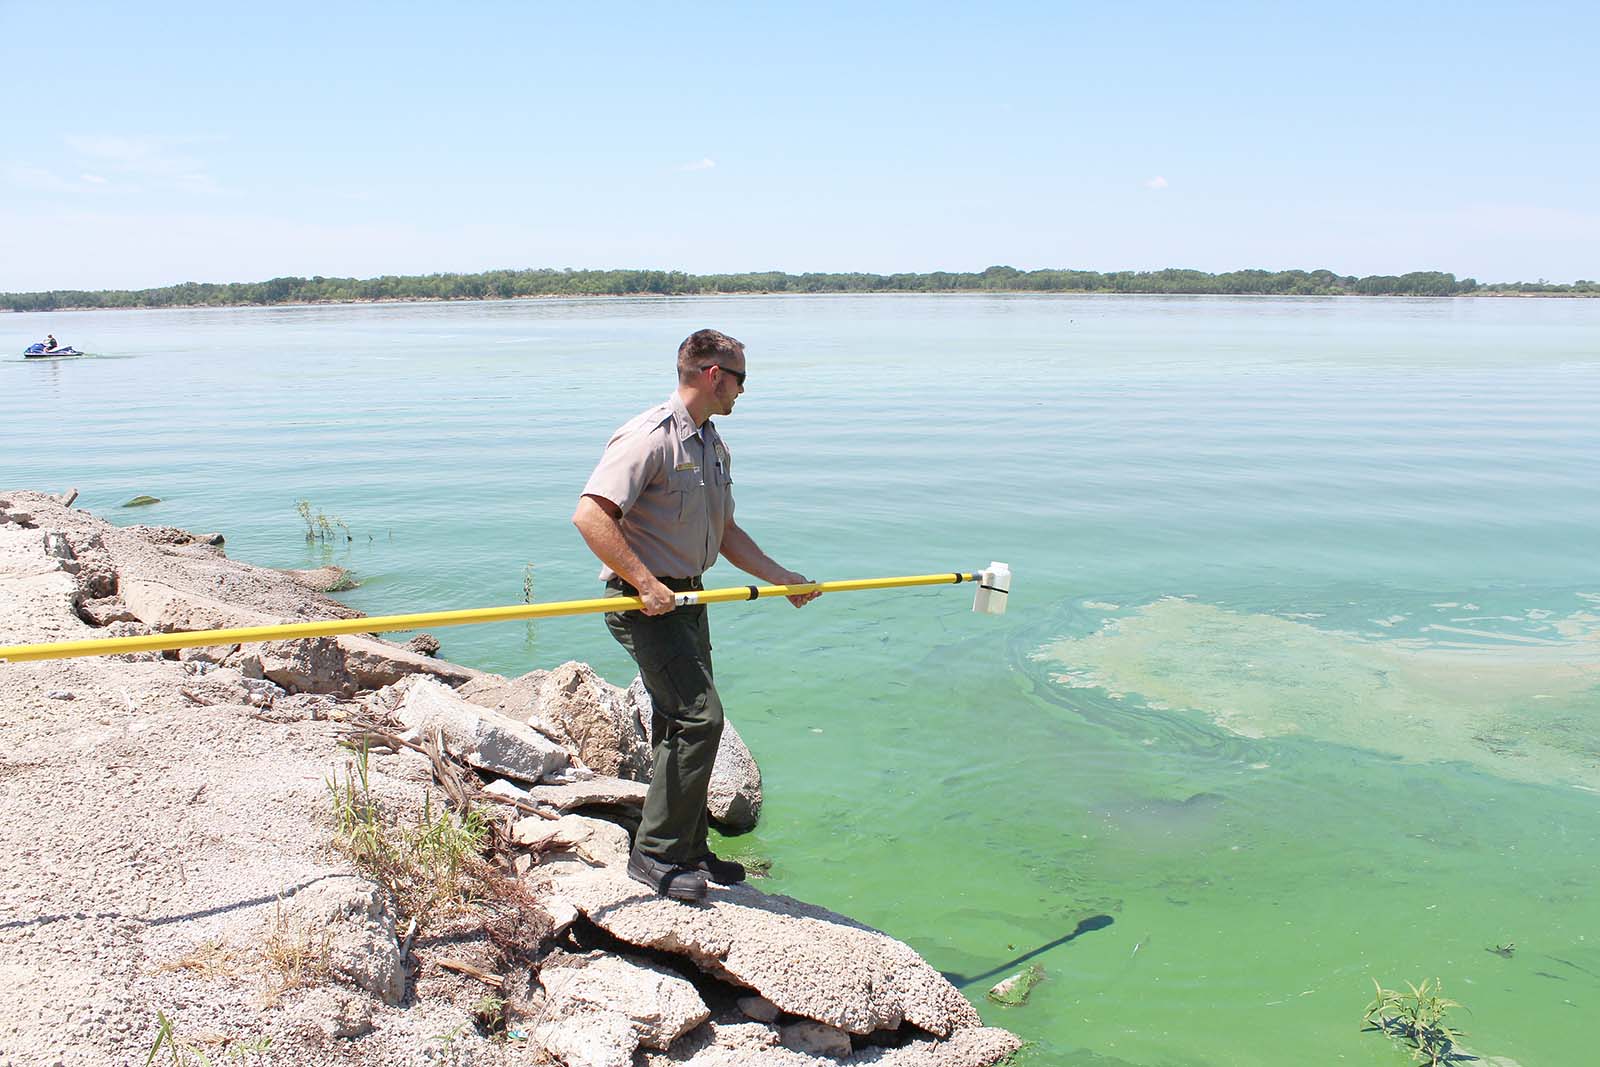 A U.S. Army Corps of Engineers ranger samples at Milford Lake, Kansas, during a harmful algal bloom event in the summer of 2021. (USACE photo by Kansas City District)